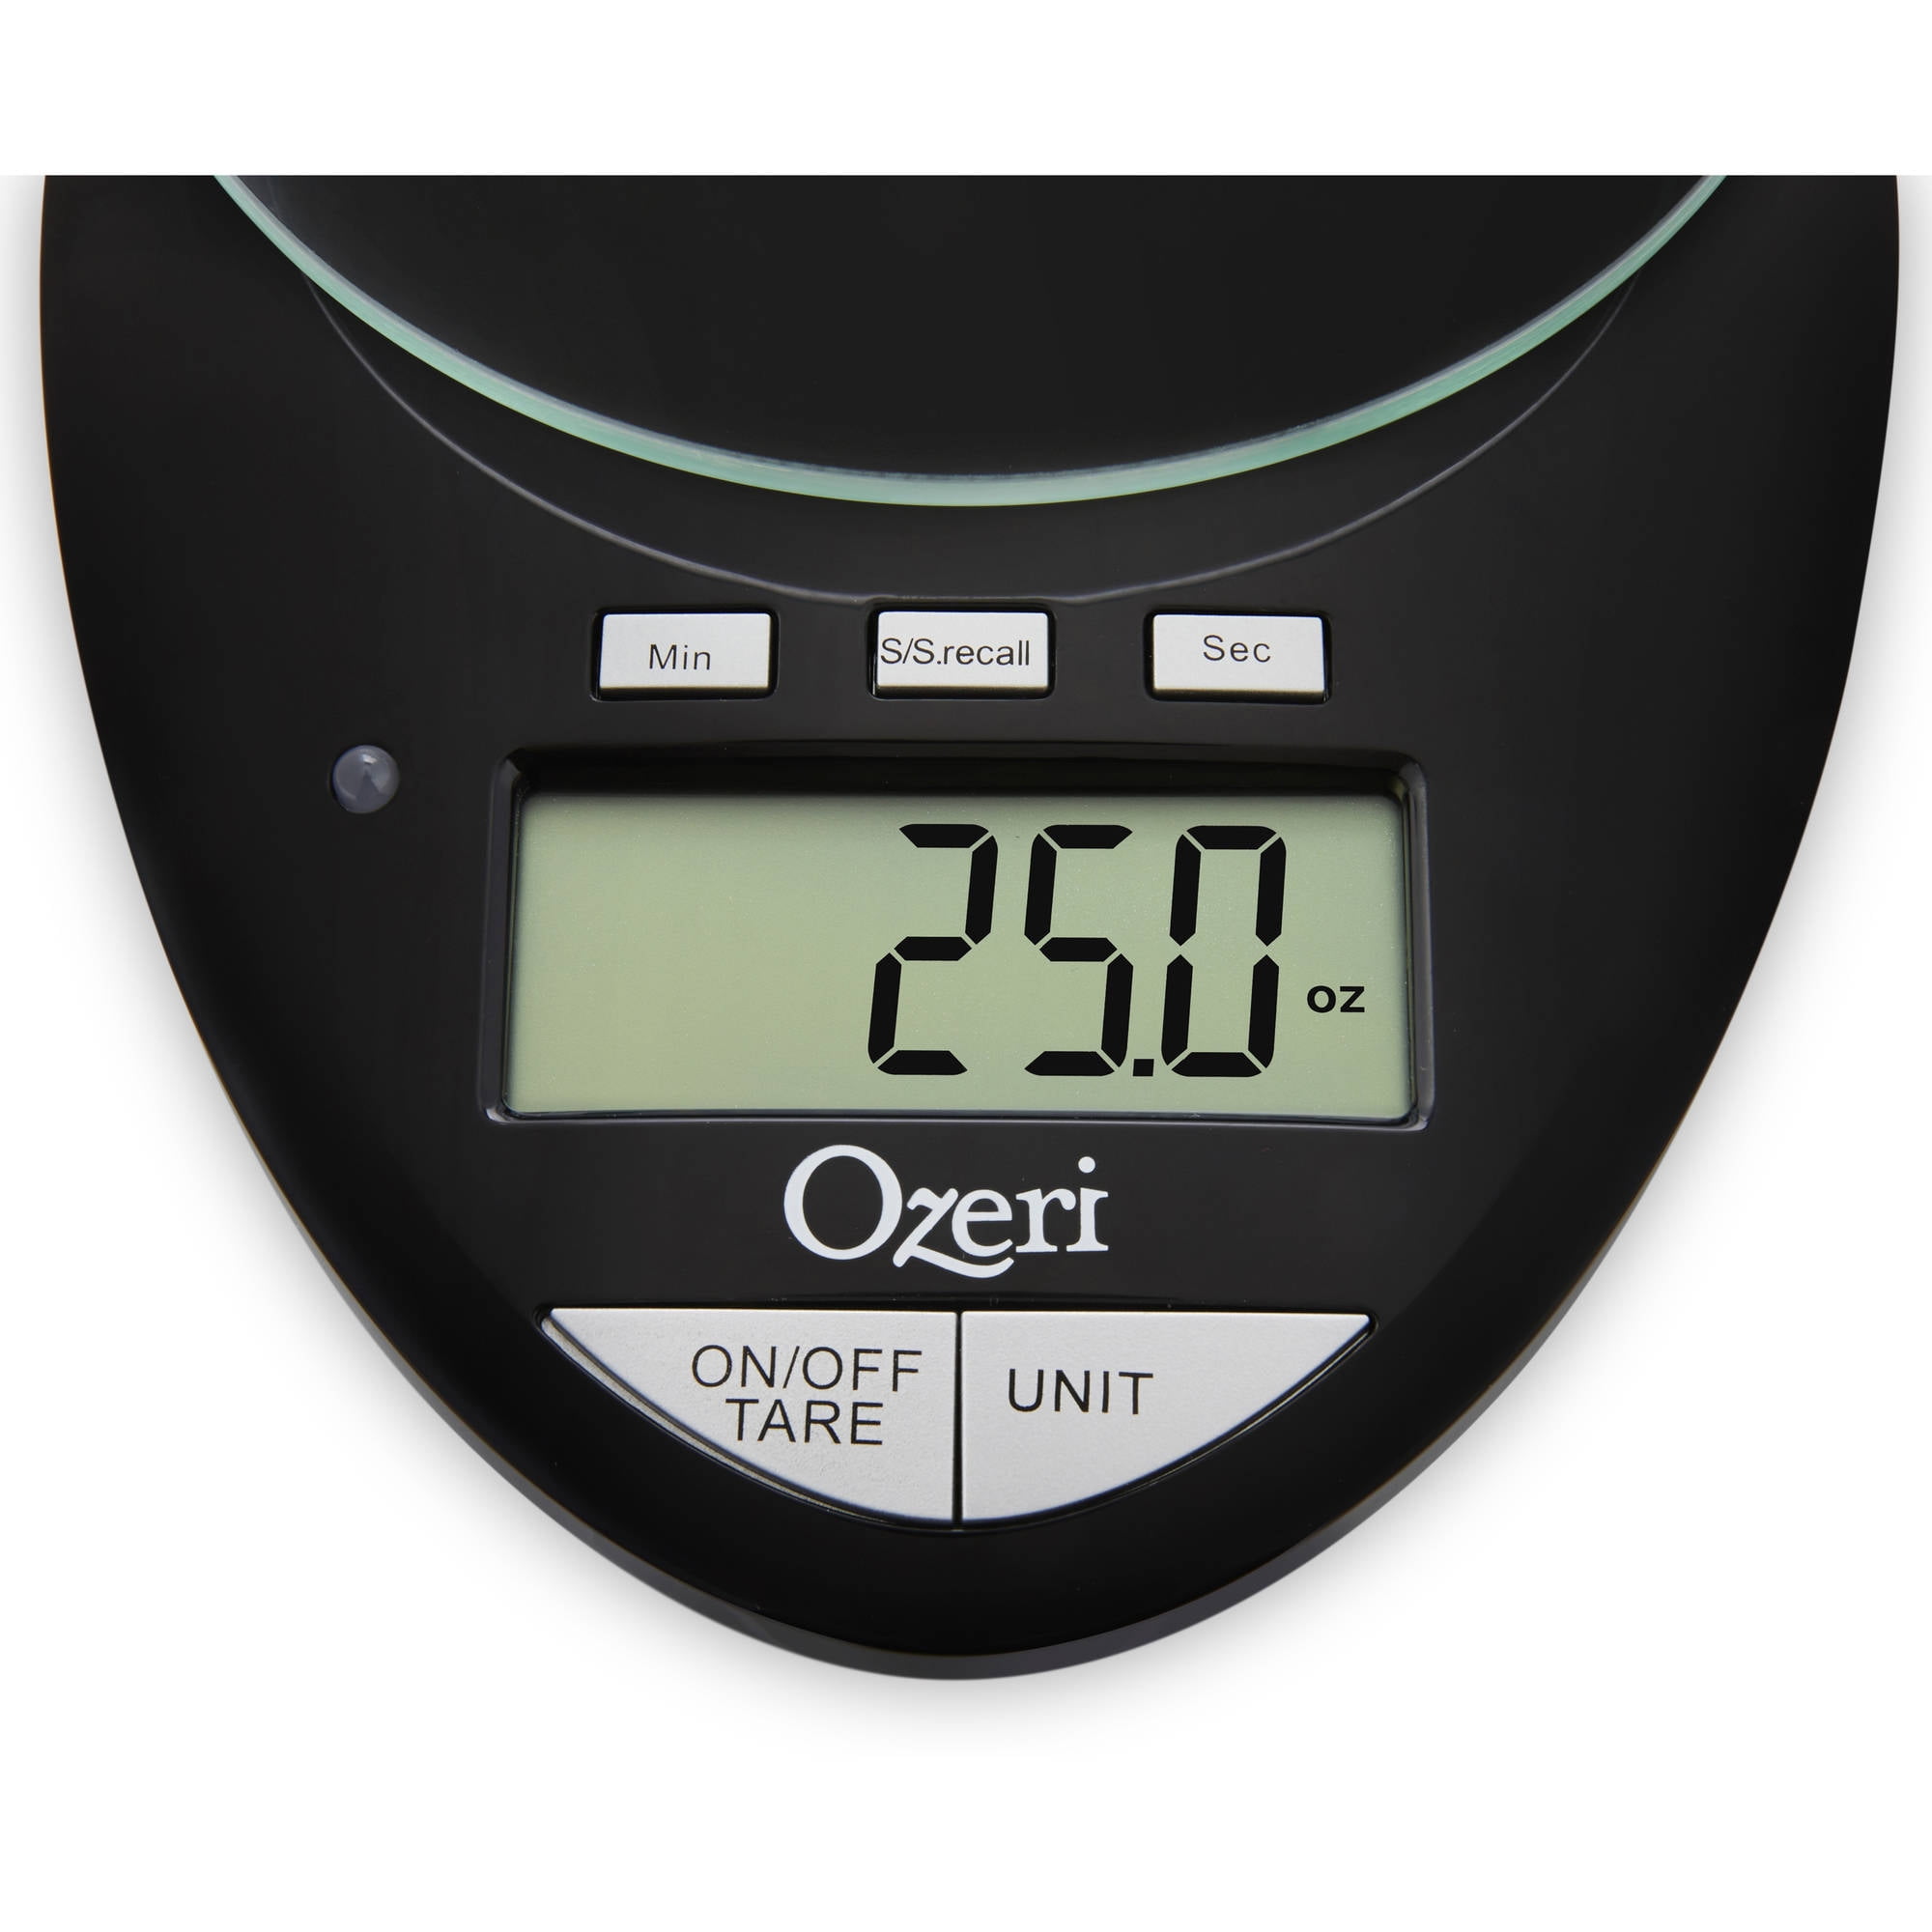 Ozeri 0.05 oz. to 12 lbs. Pro Digital Kitchen Food Scale (1 g to 5.4 kg)  ZK12-BE - The Home Depot